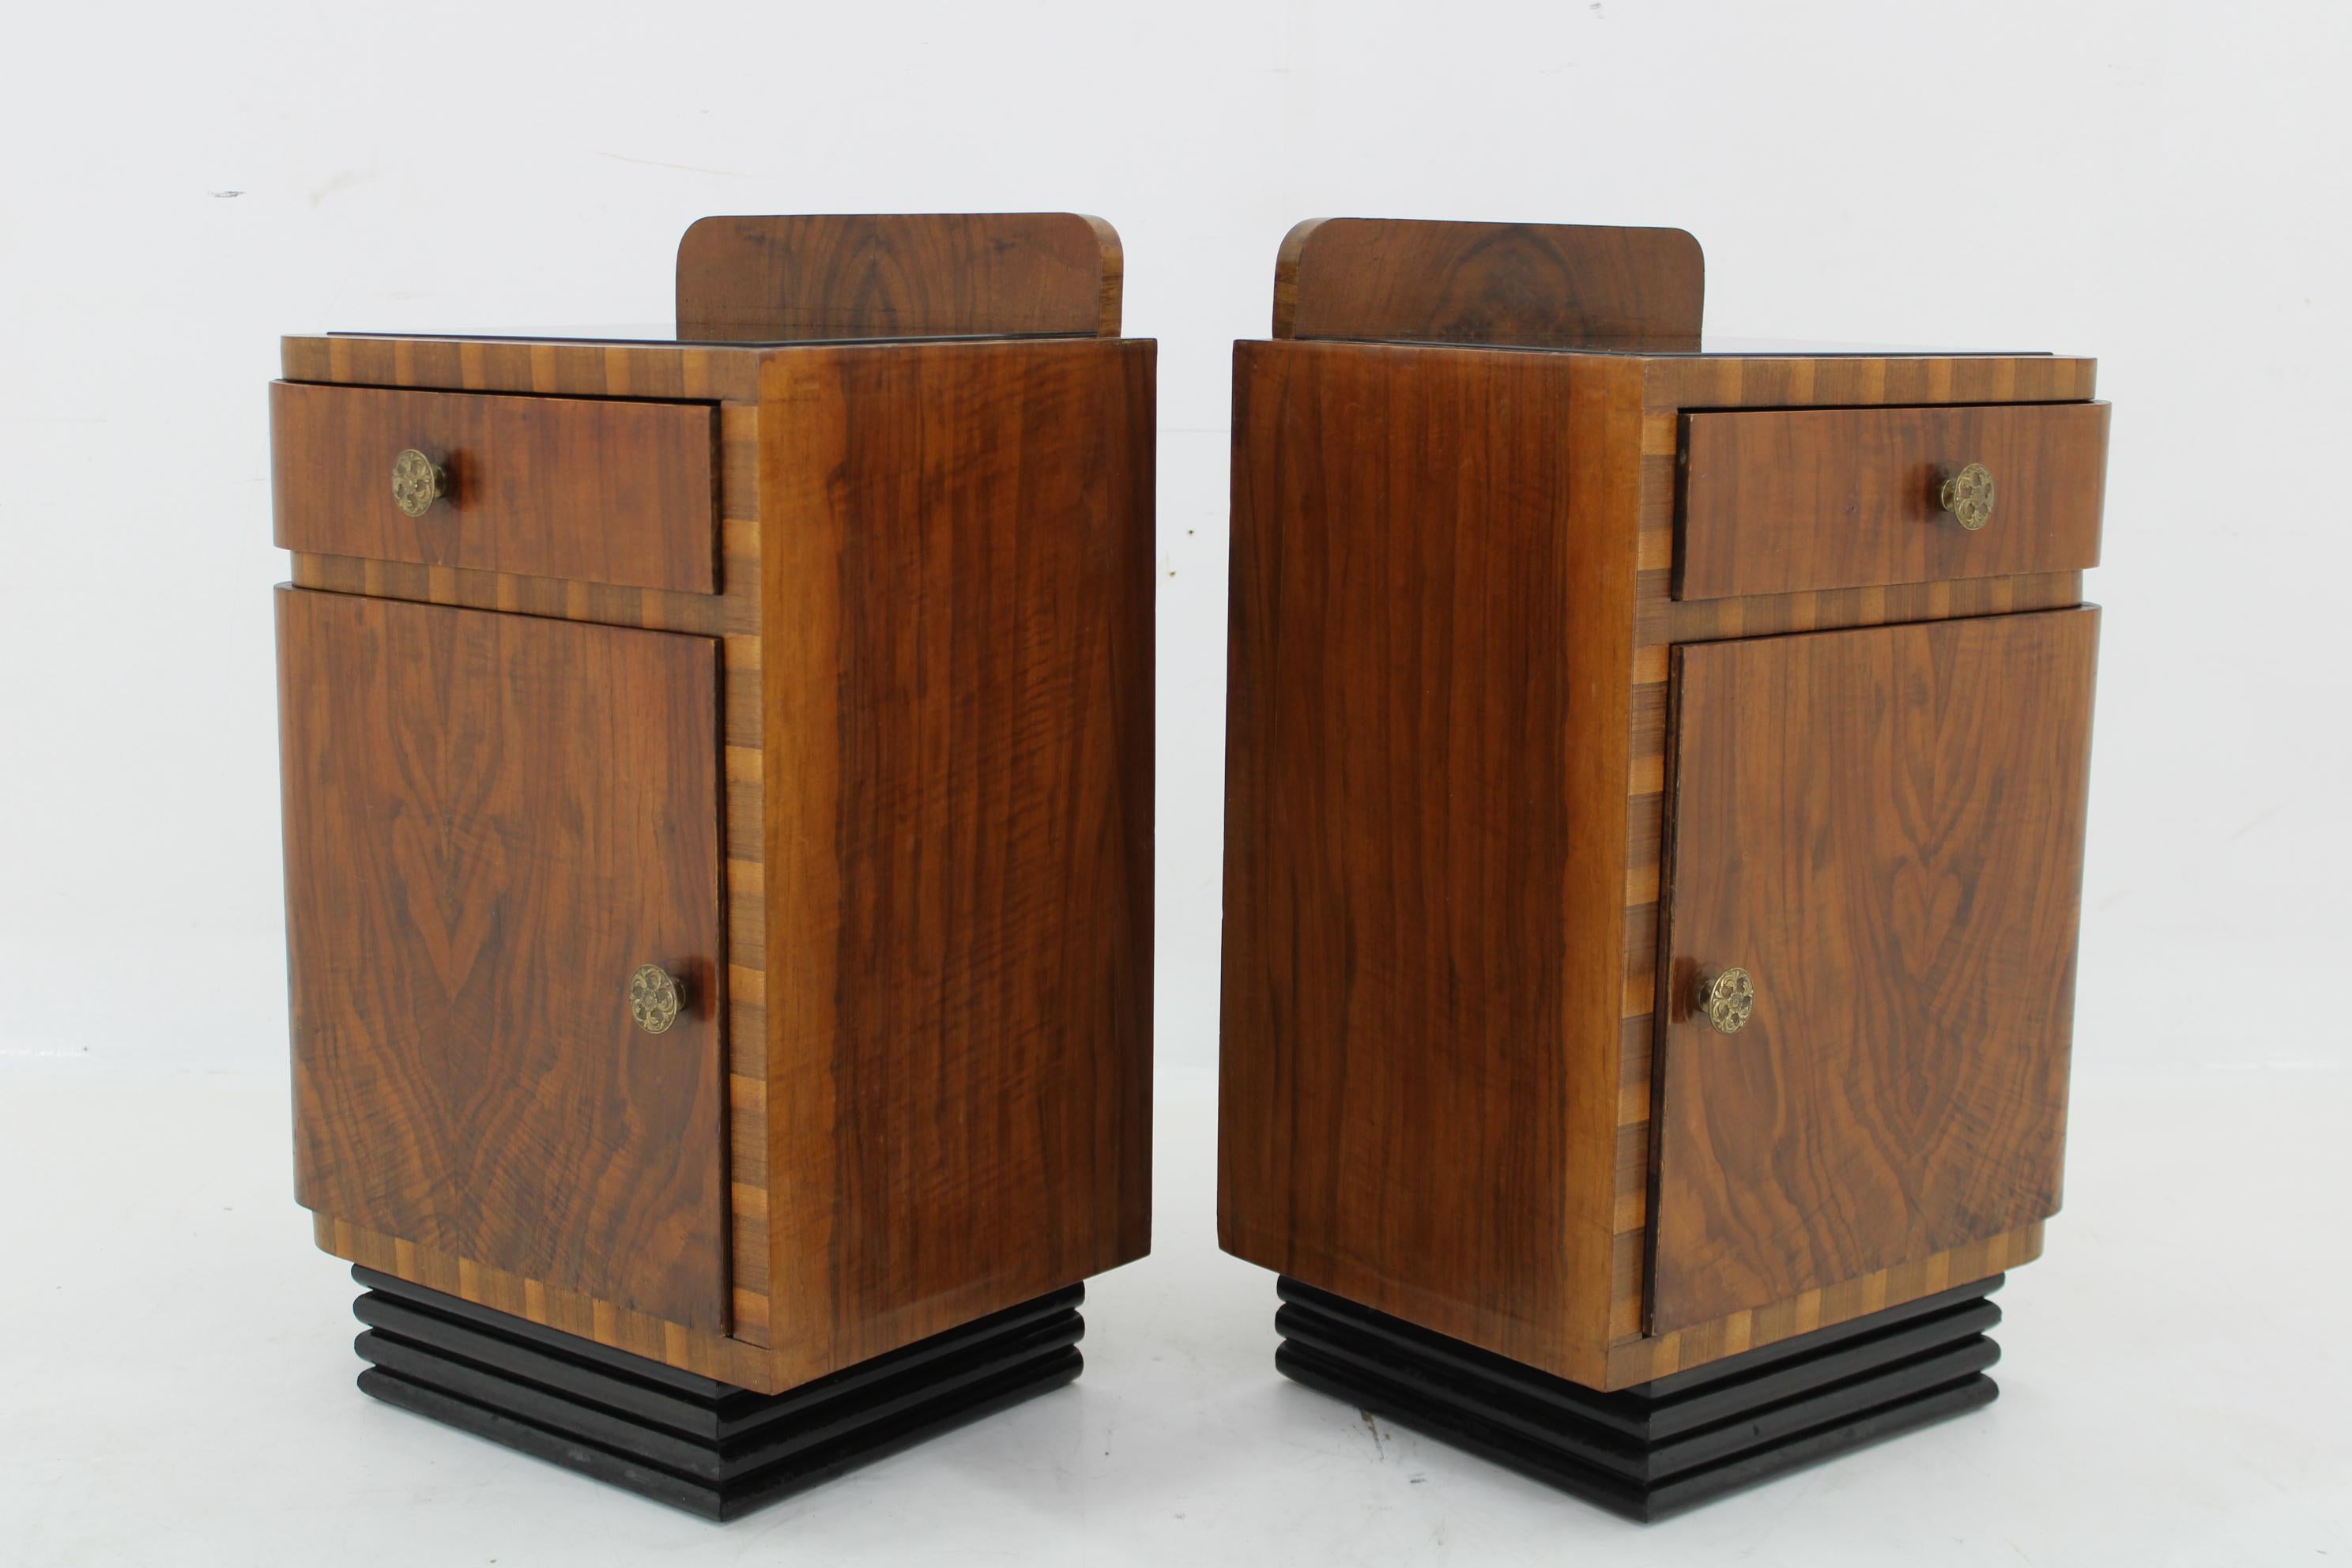 1940s Pair of Art Deco Nightstands in Walnut Finish, Italy For Sale 1